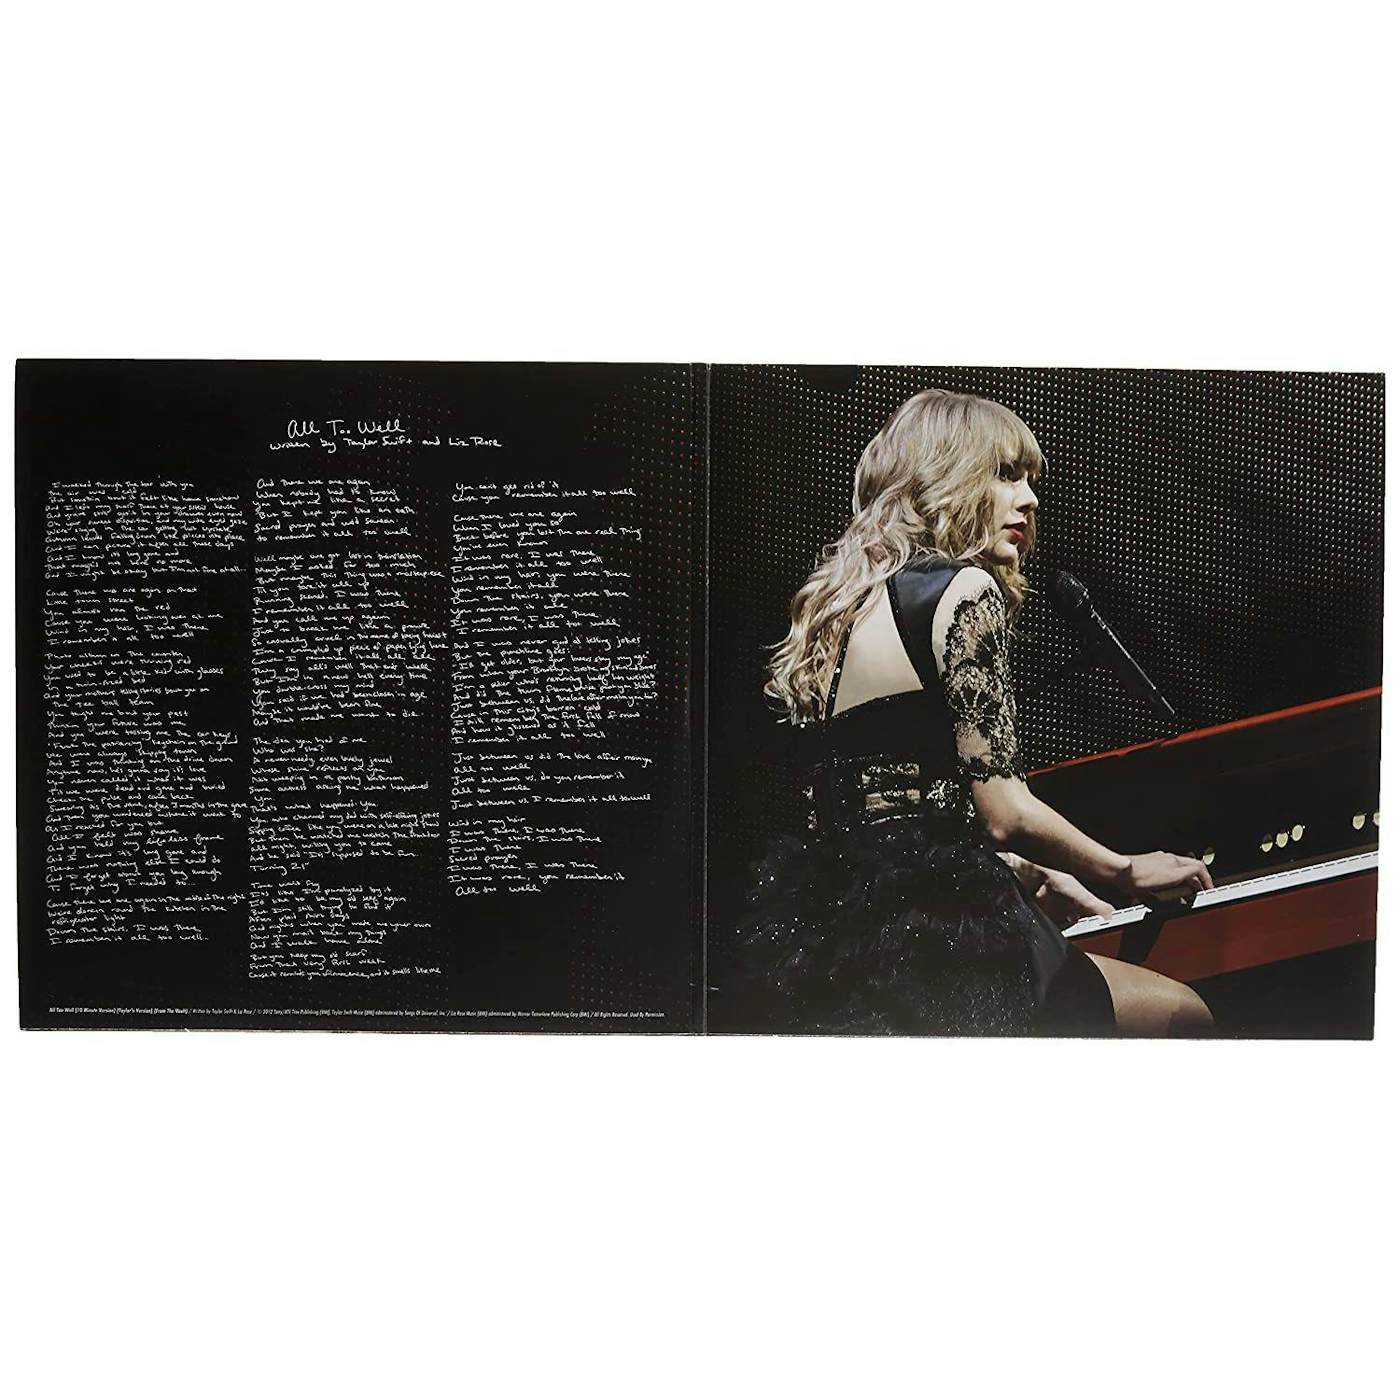 Taylor Swift: Red (Taylor's Version) [4LP] (Limited Edition